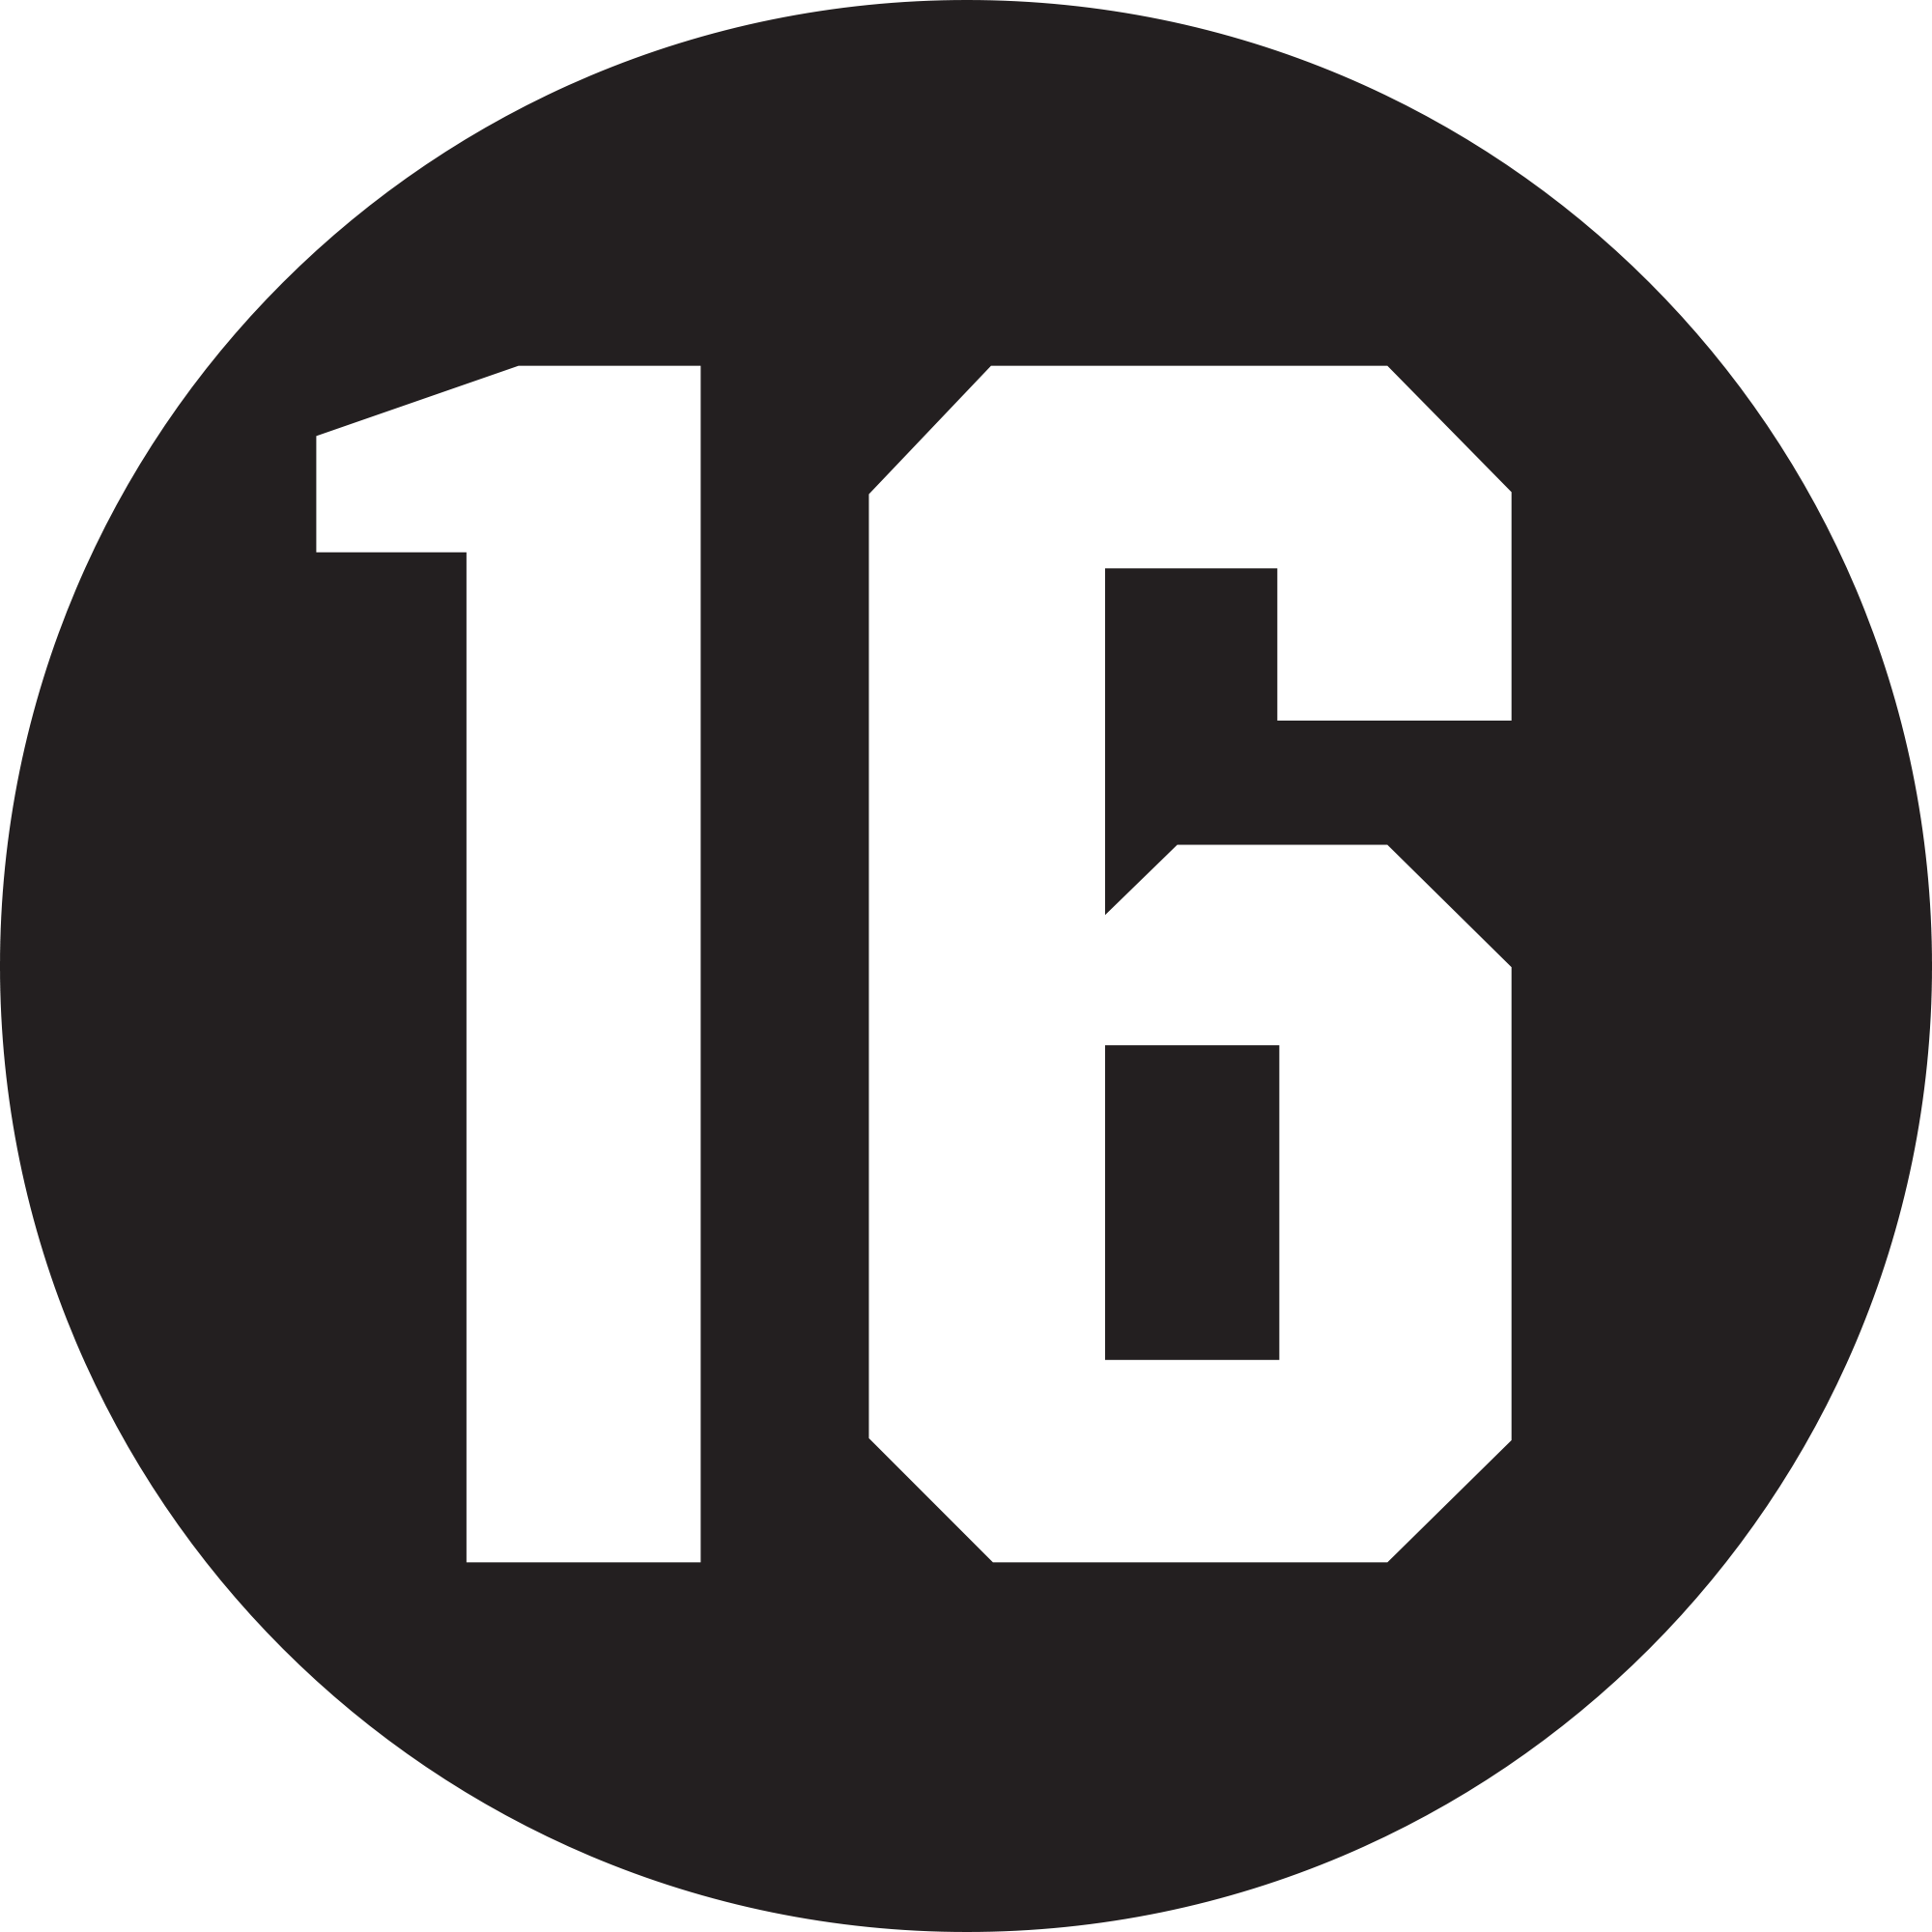 Image result for 16